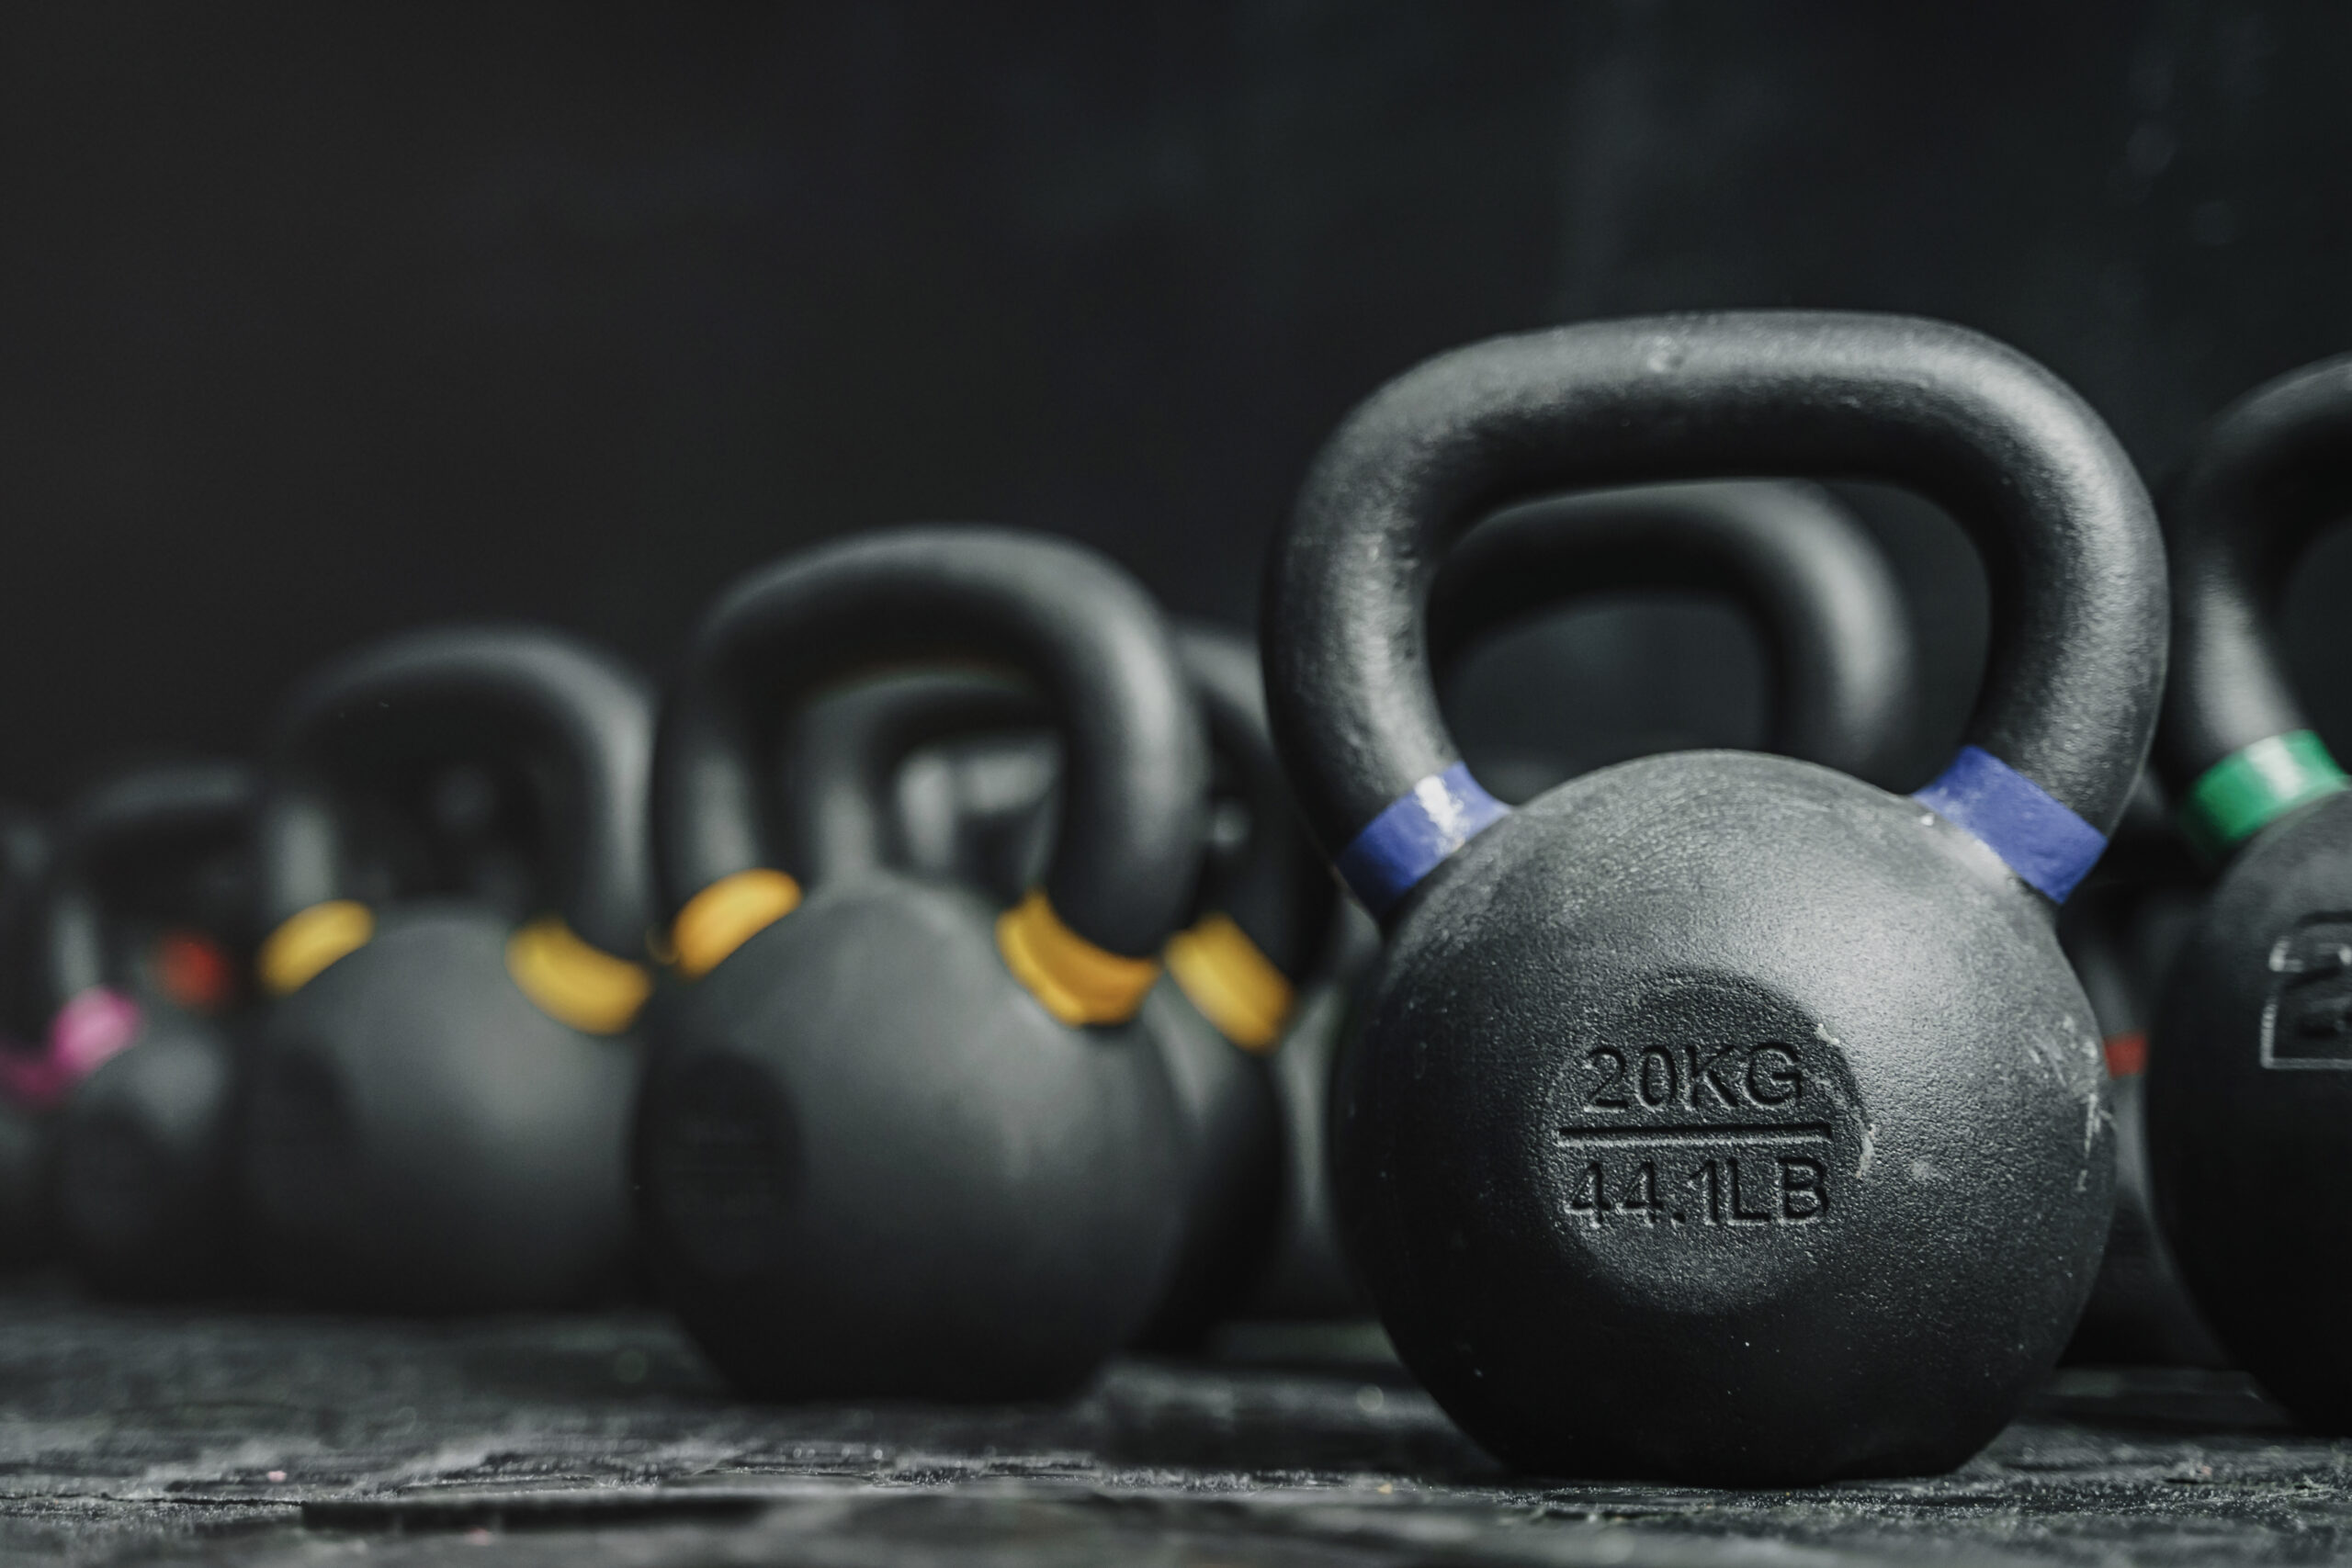 Kettle bell set at top rated gym near me